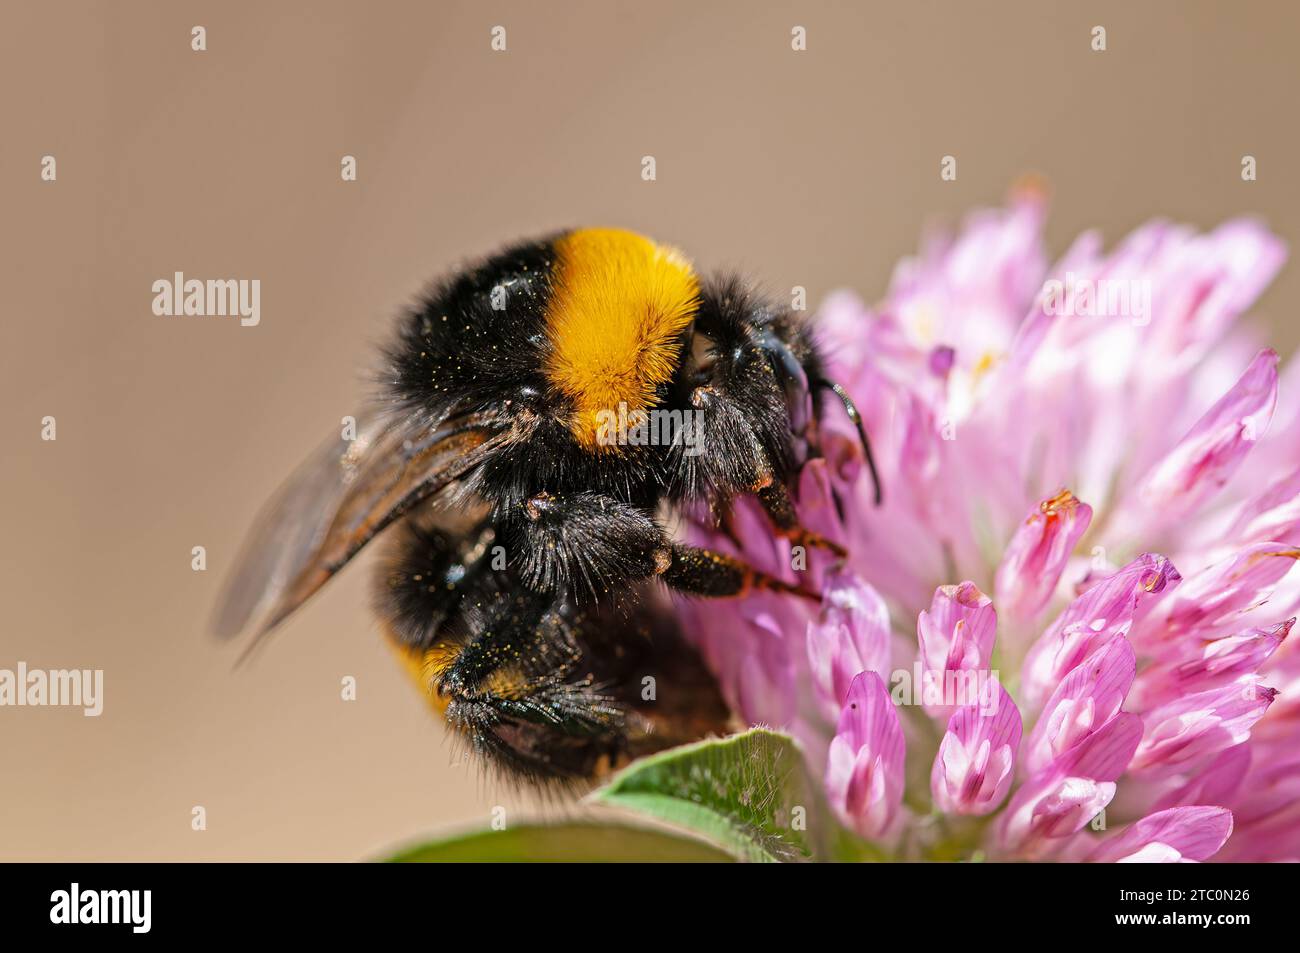 European Common Carder Bumble bee (Bombus pascuorum) feeding on a pink clover flower Stock Photo